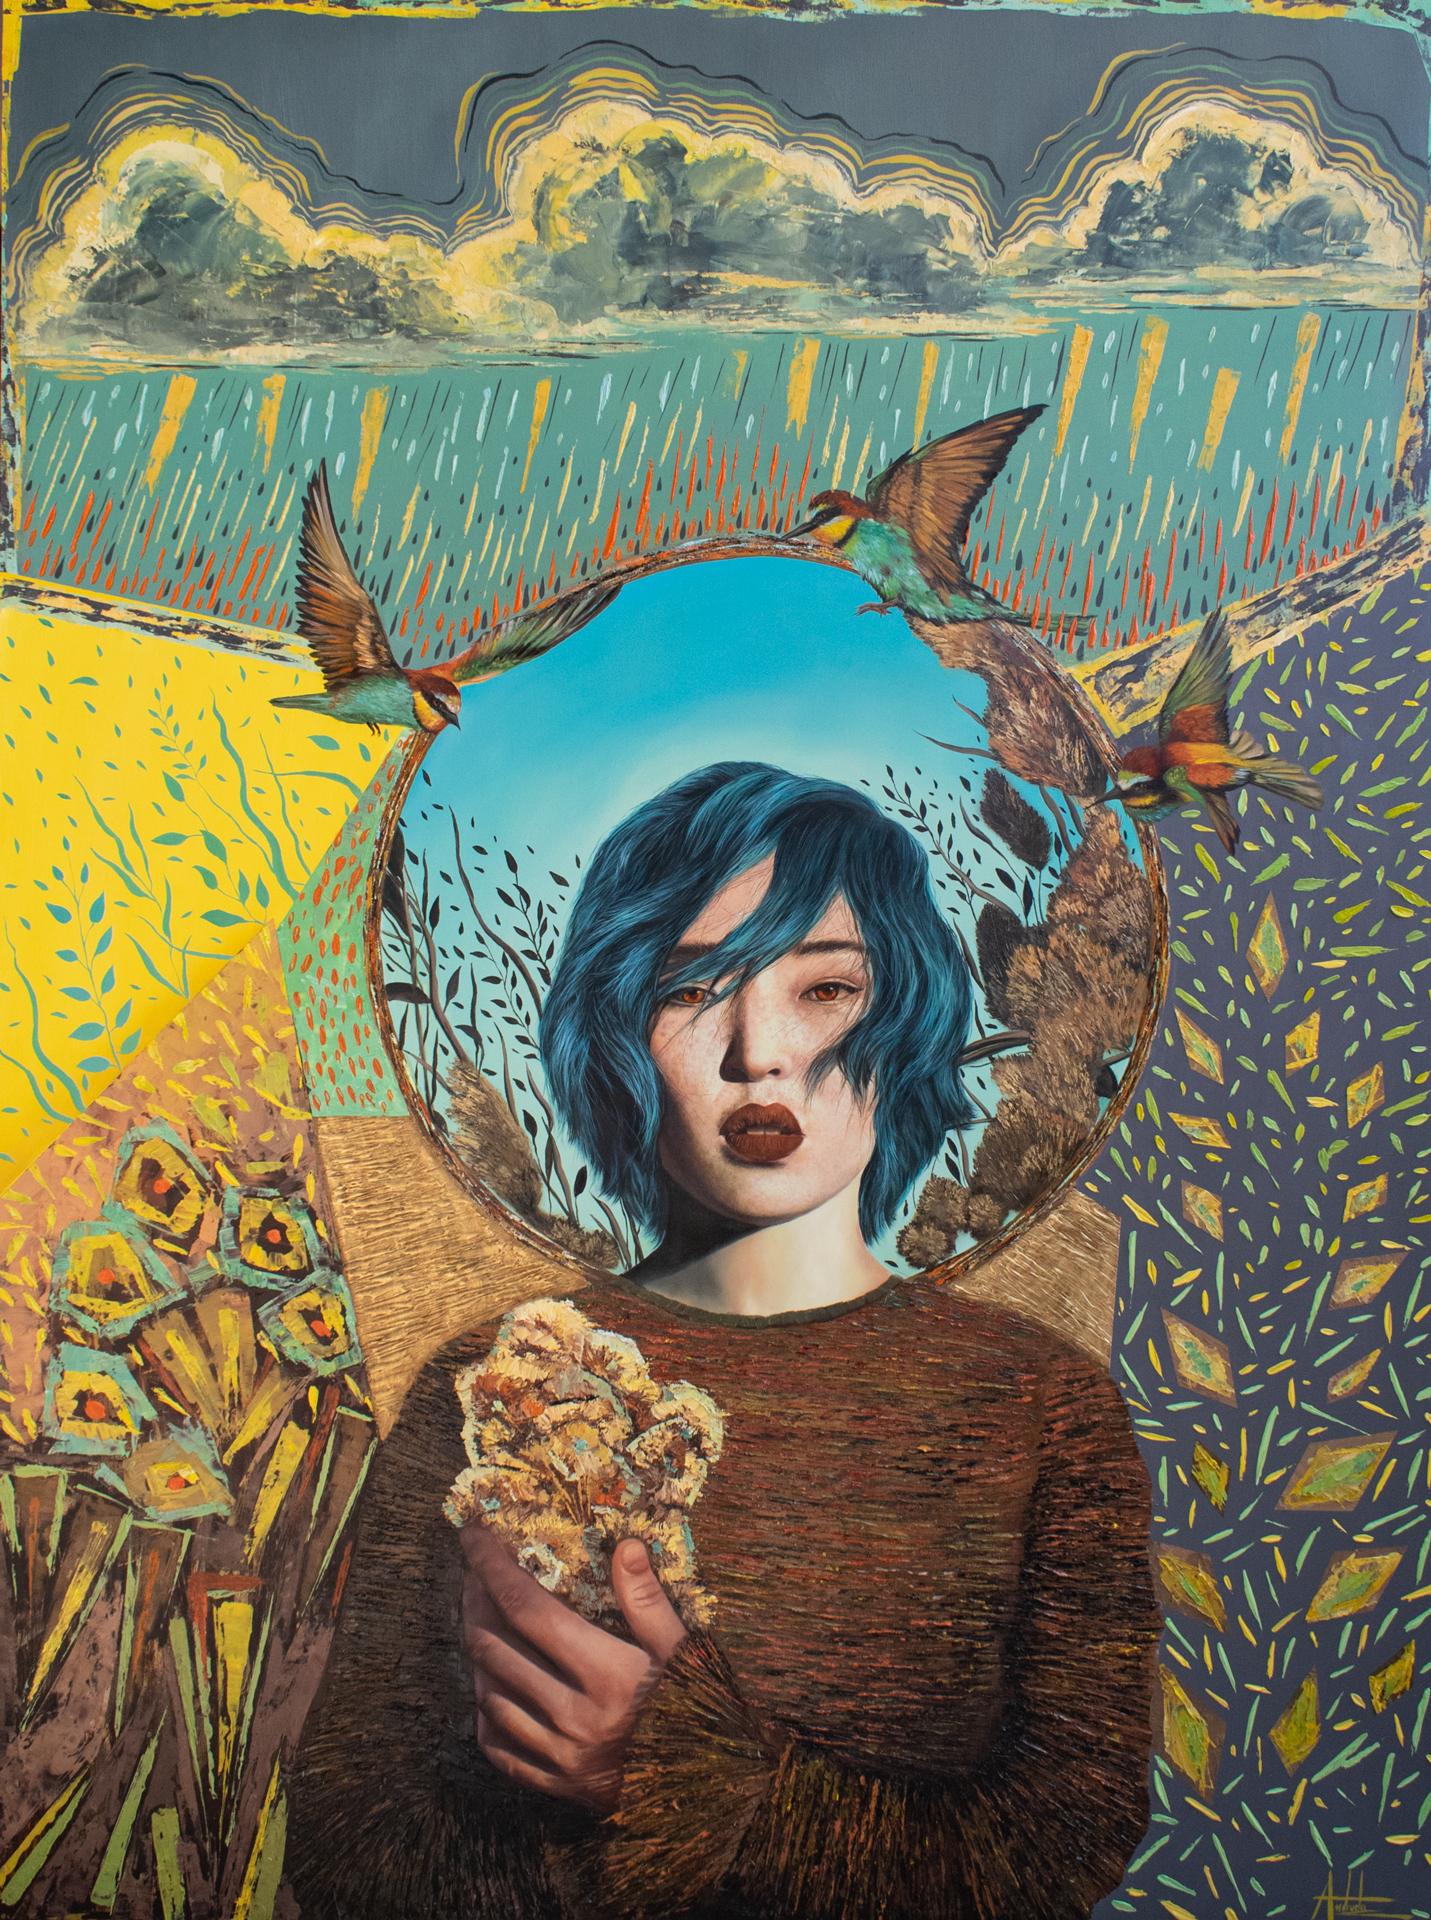 "Eye of the Storm," an original mixed media artwork by Andrada Trapnell, measures 40 x 30 inches and is rendered on a sturdy board. Created in 2023, this piece showcases Trapnell's distinctive style, featuring a surreal portrait of a woman framed